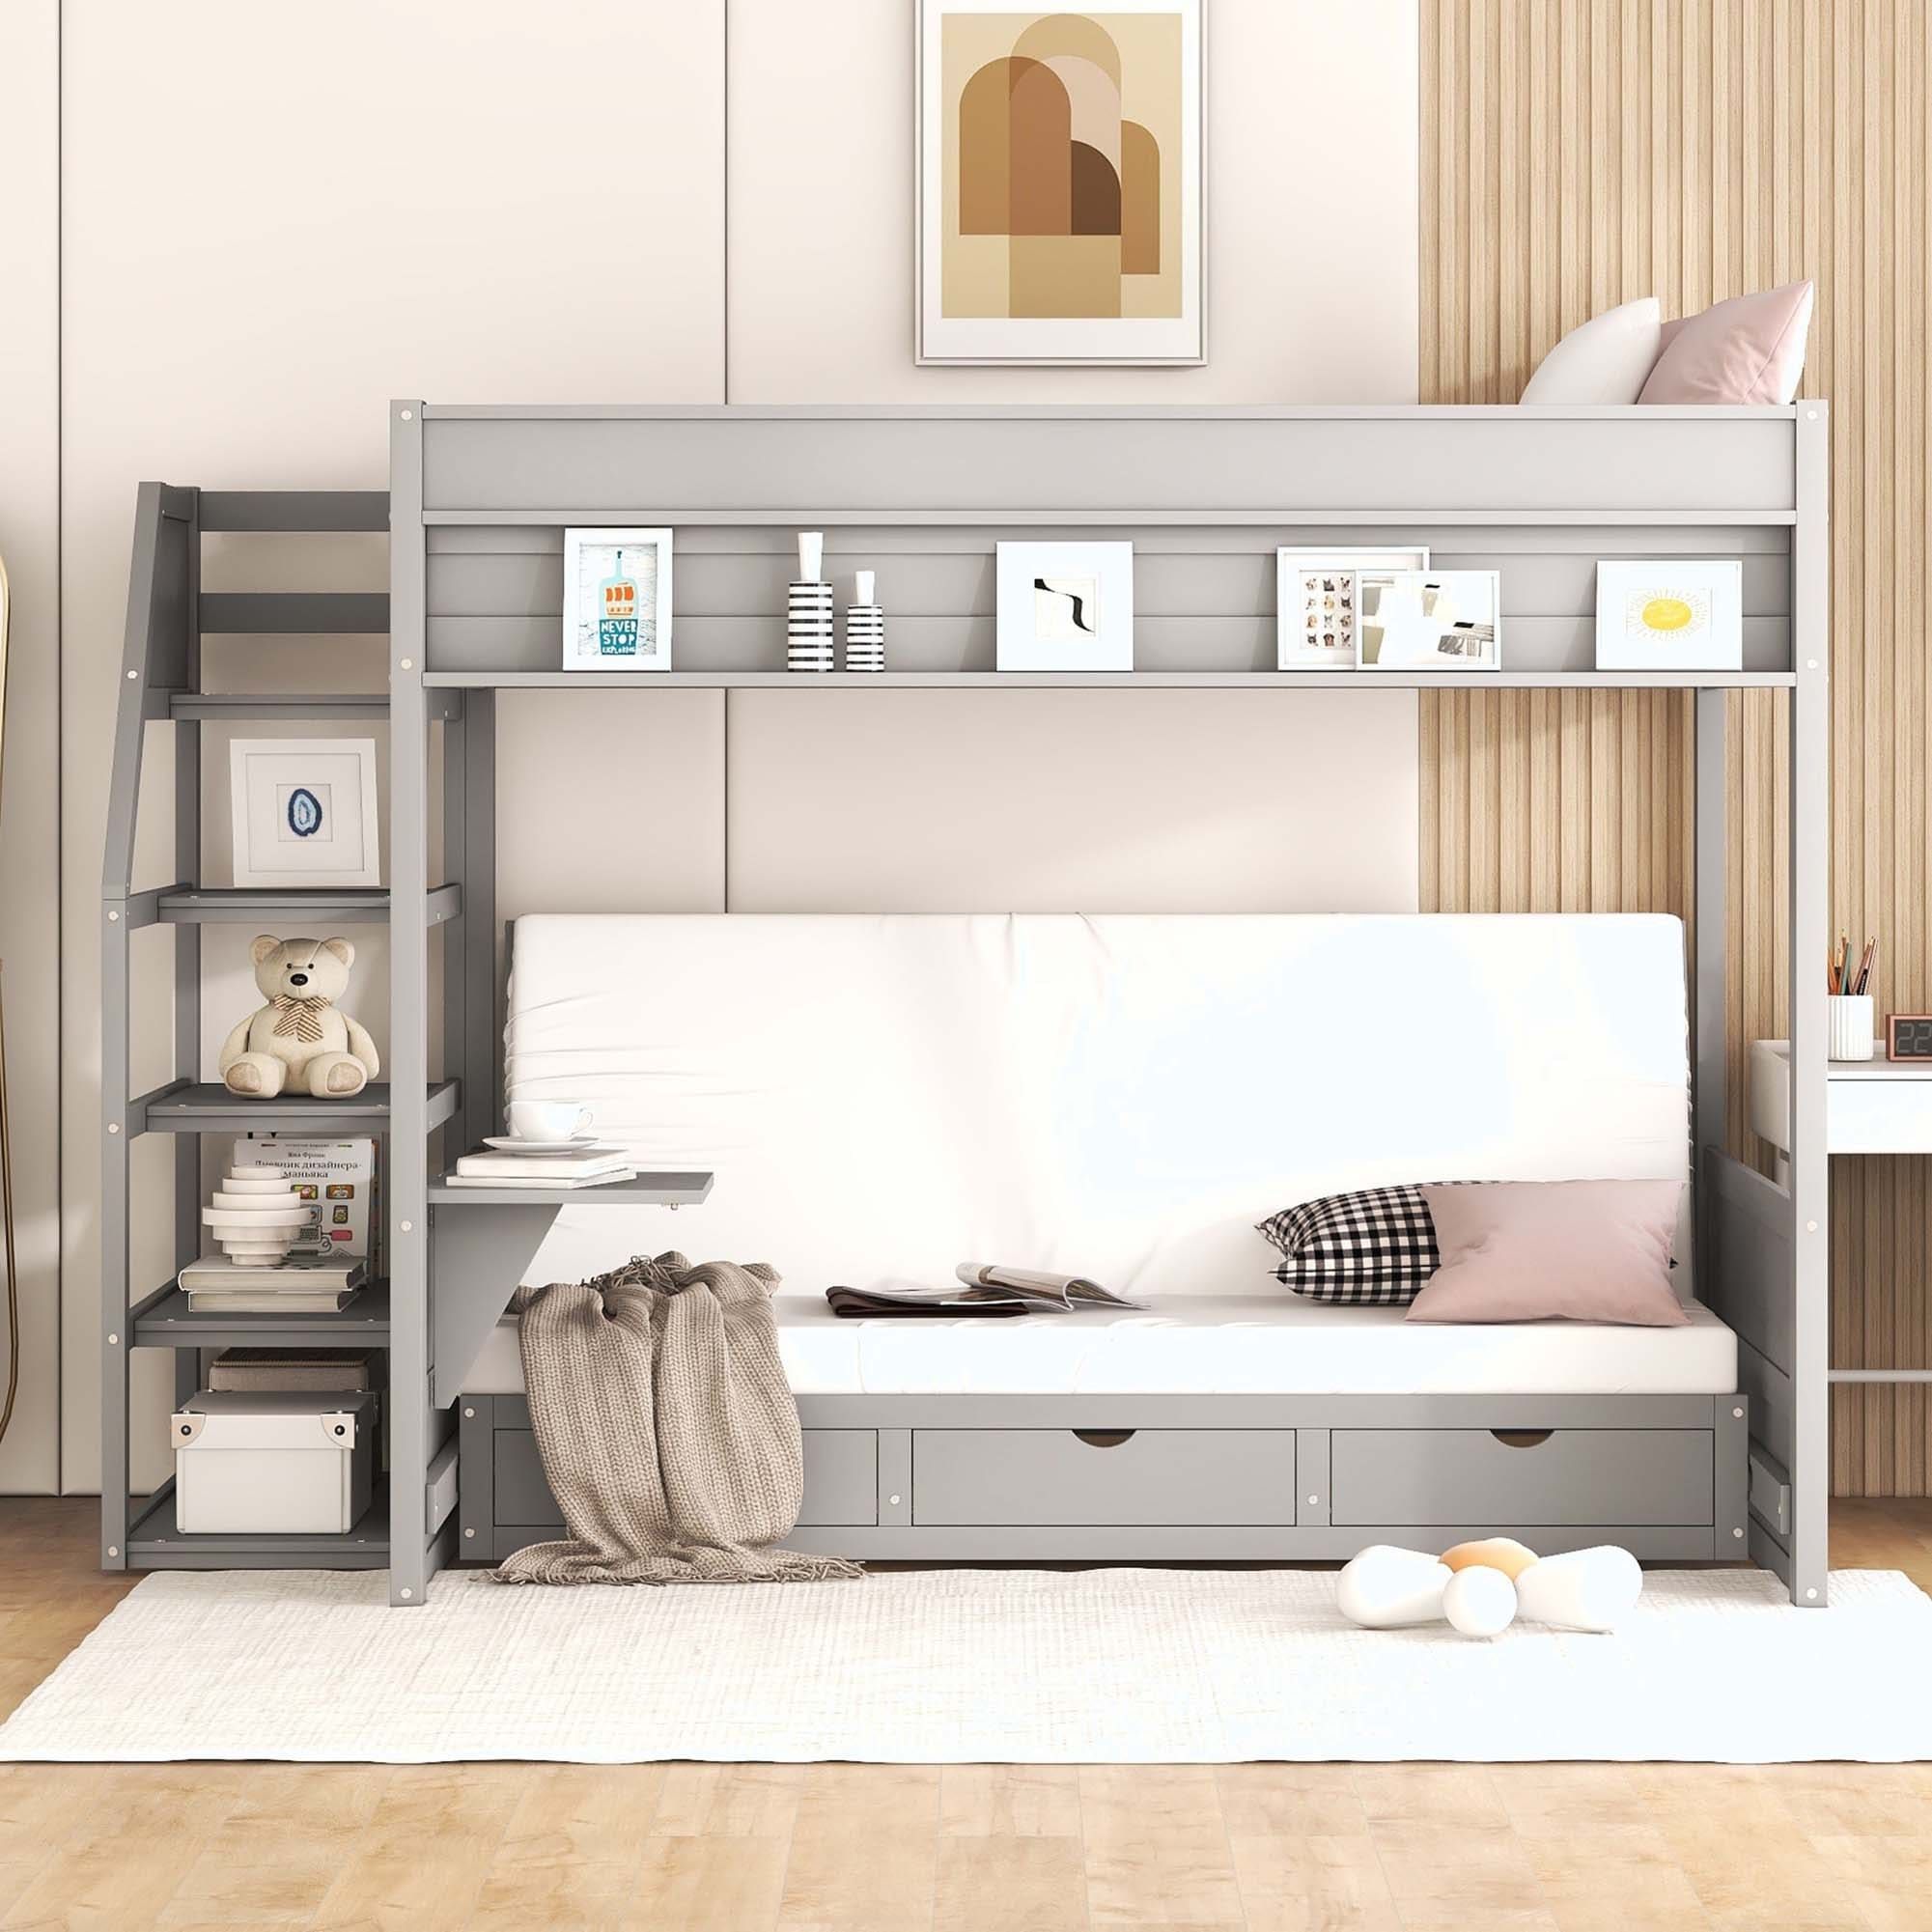 Optimizing Space: Bunk Beds with Stairway Access and Seamless Storage